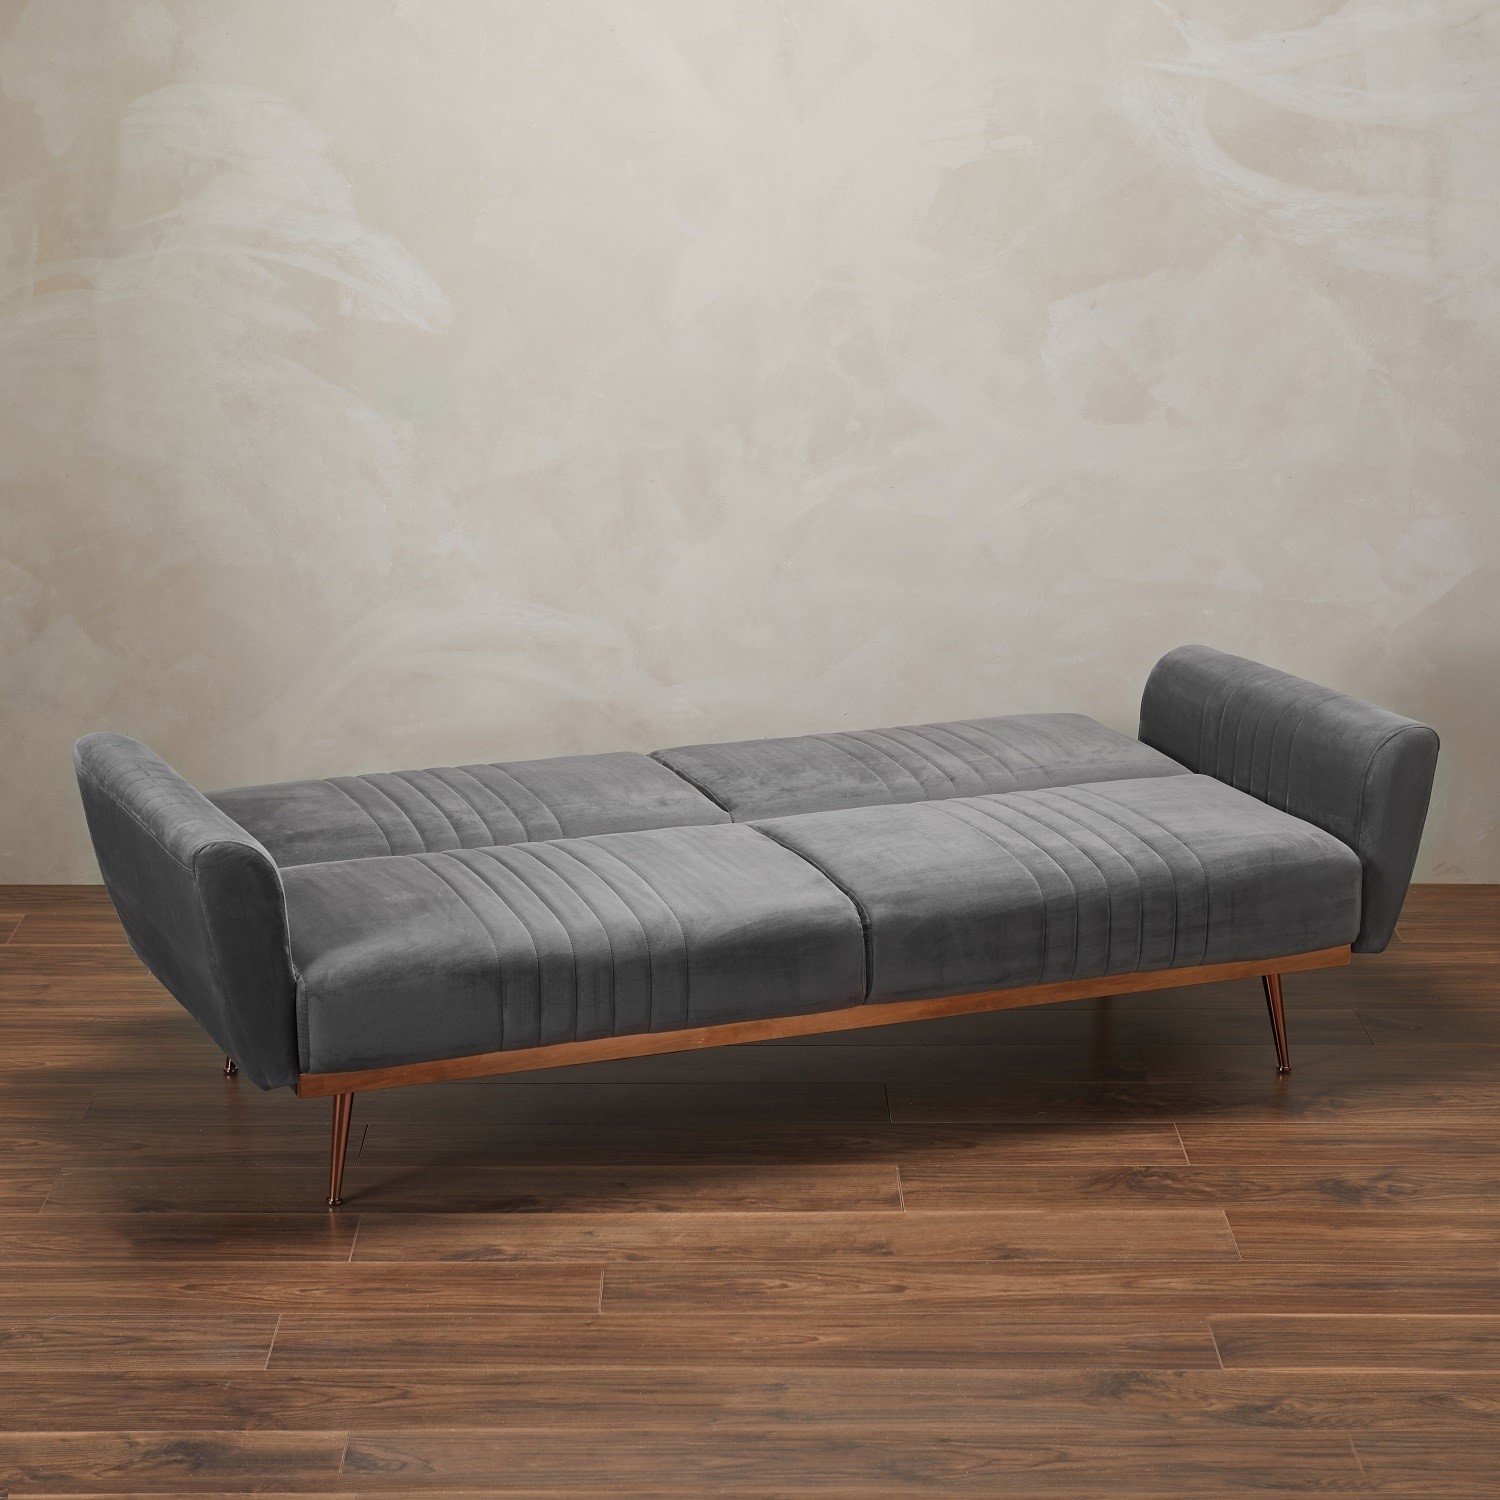 Read more about 3 seater click-clack sofa bed in grey velvet nico